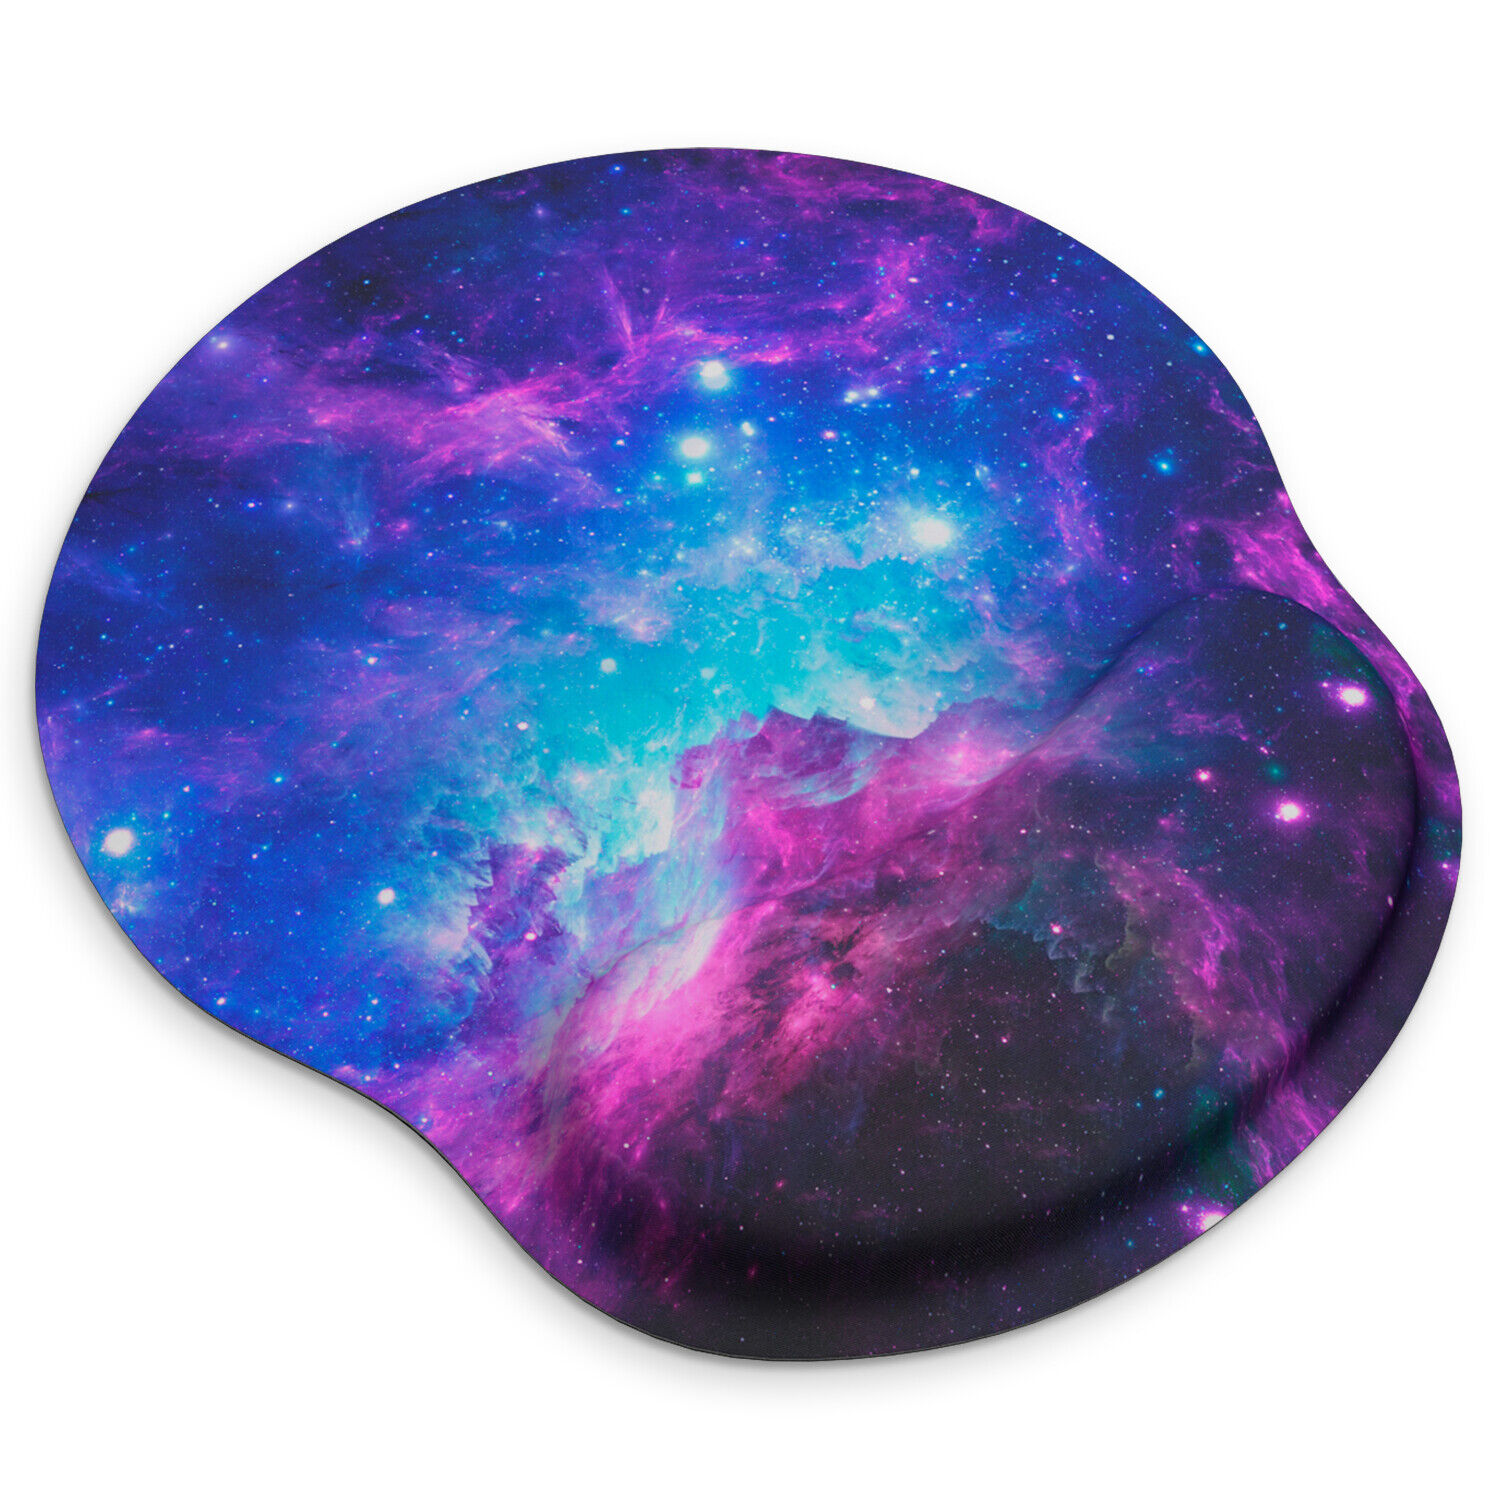 Gaming Mouse Pad w Wrist Rest Support & Non-Slip Base, Durable Ergonomic Support